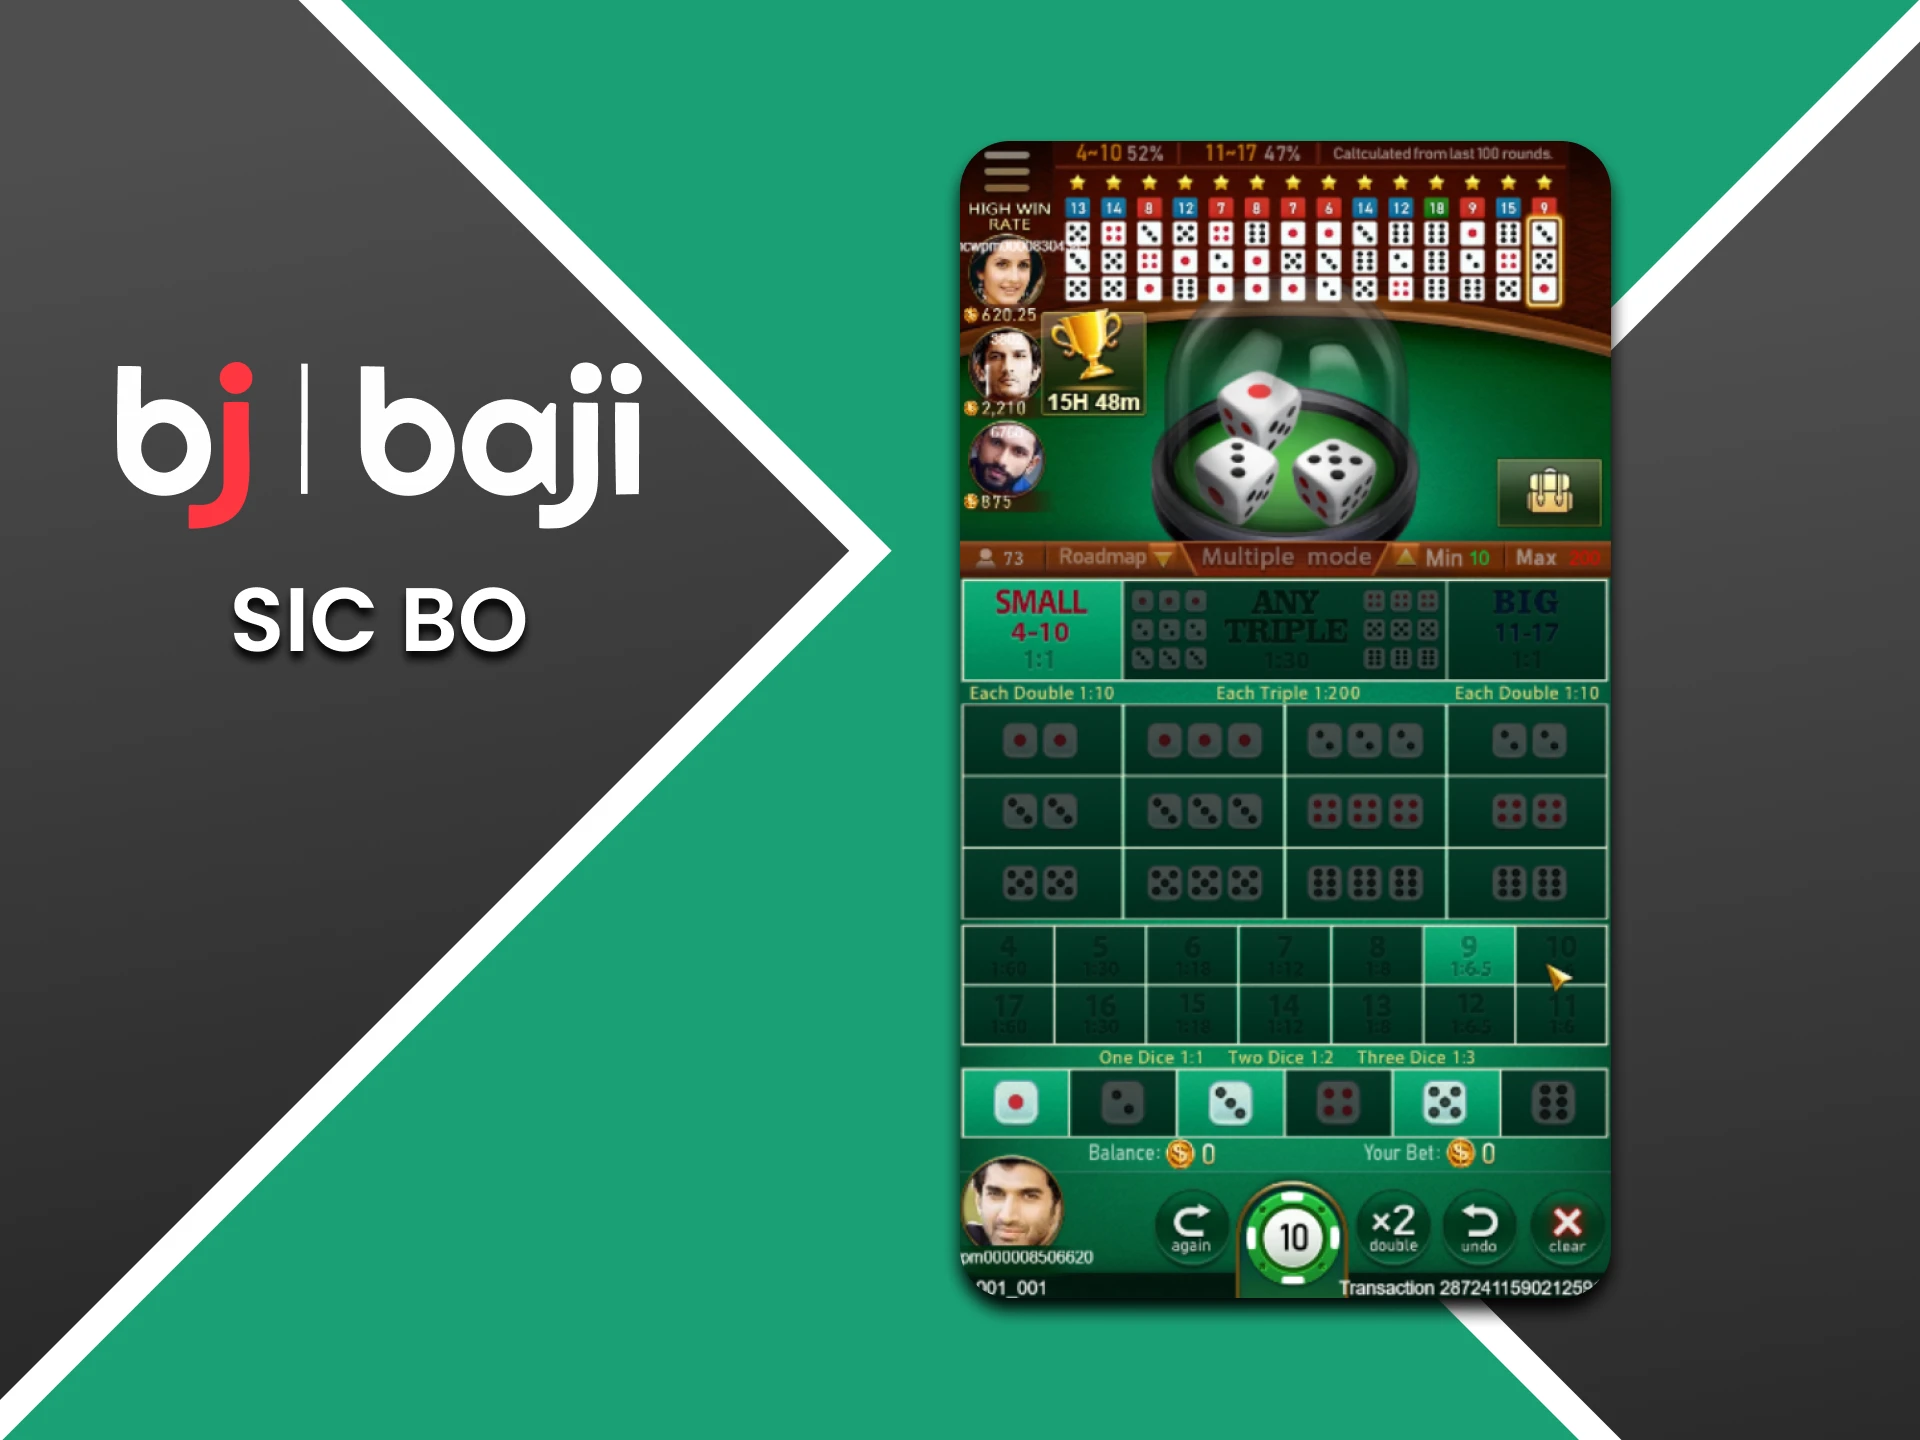 Choose Sic Bo in the table games section from Baji.